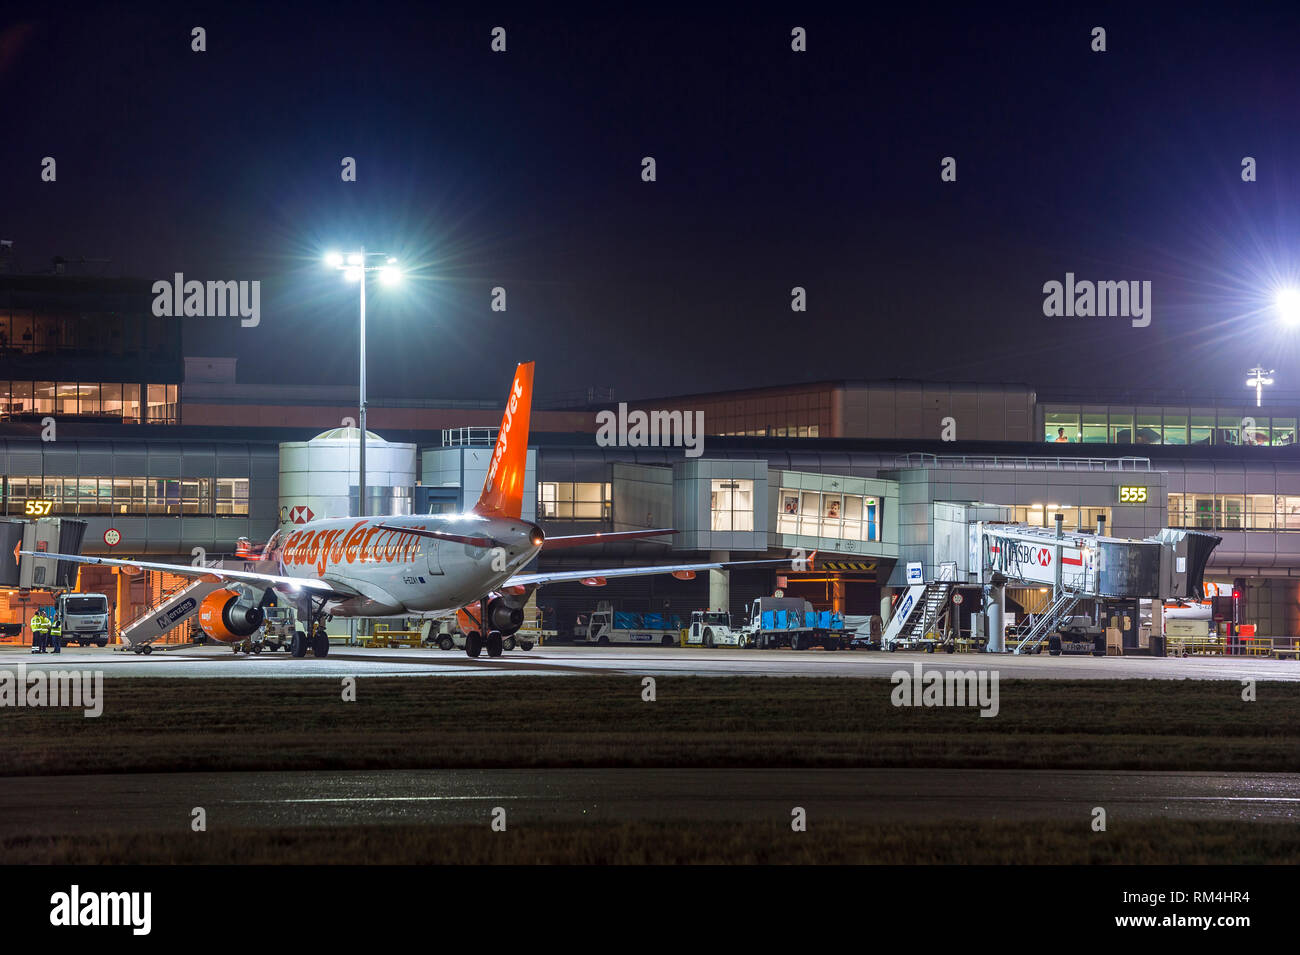 Easyjet aeroplane waiting on the apron at Gatwick Airport in the UK, at dusk. Stock Photo